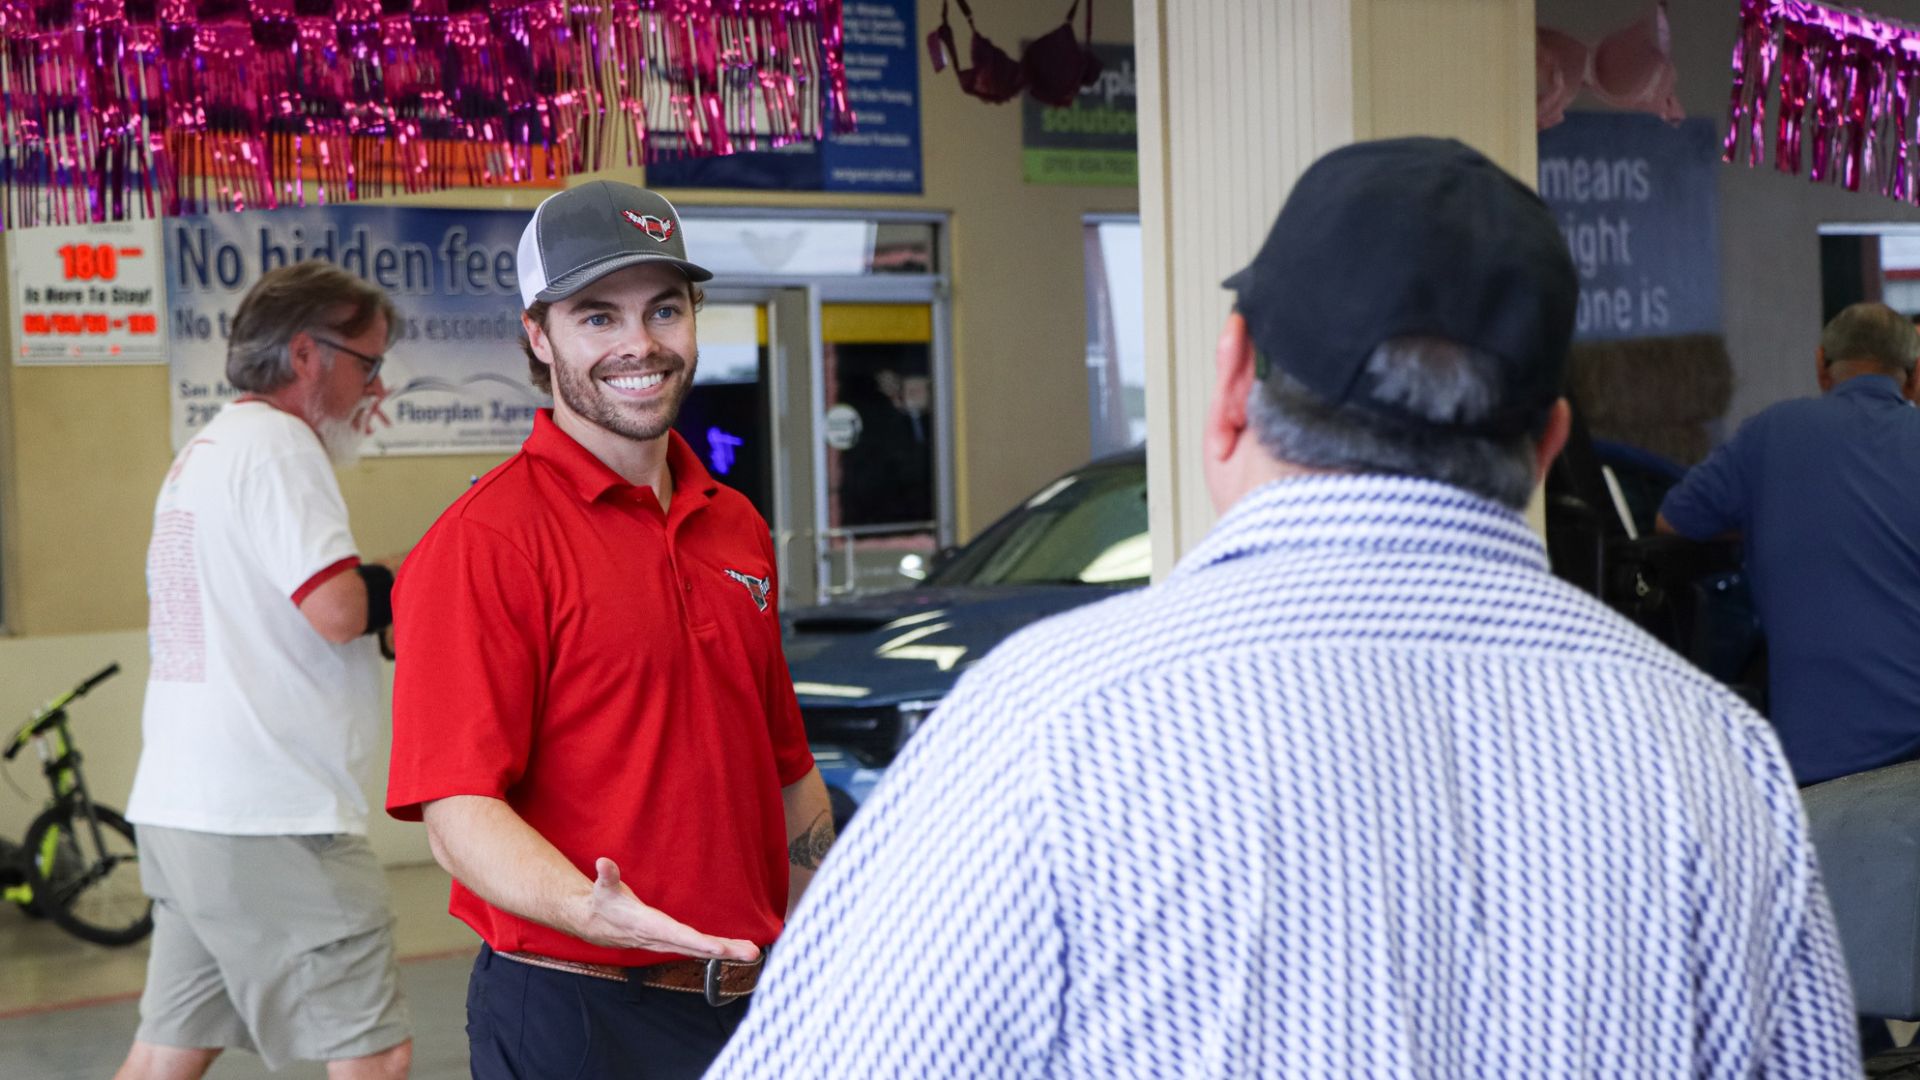 10 Tips For a Positive Auto Auction Experience